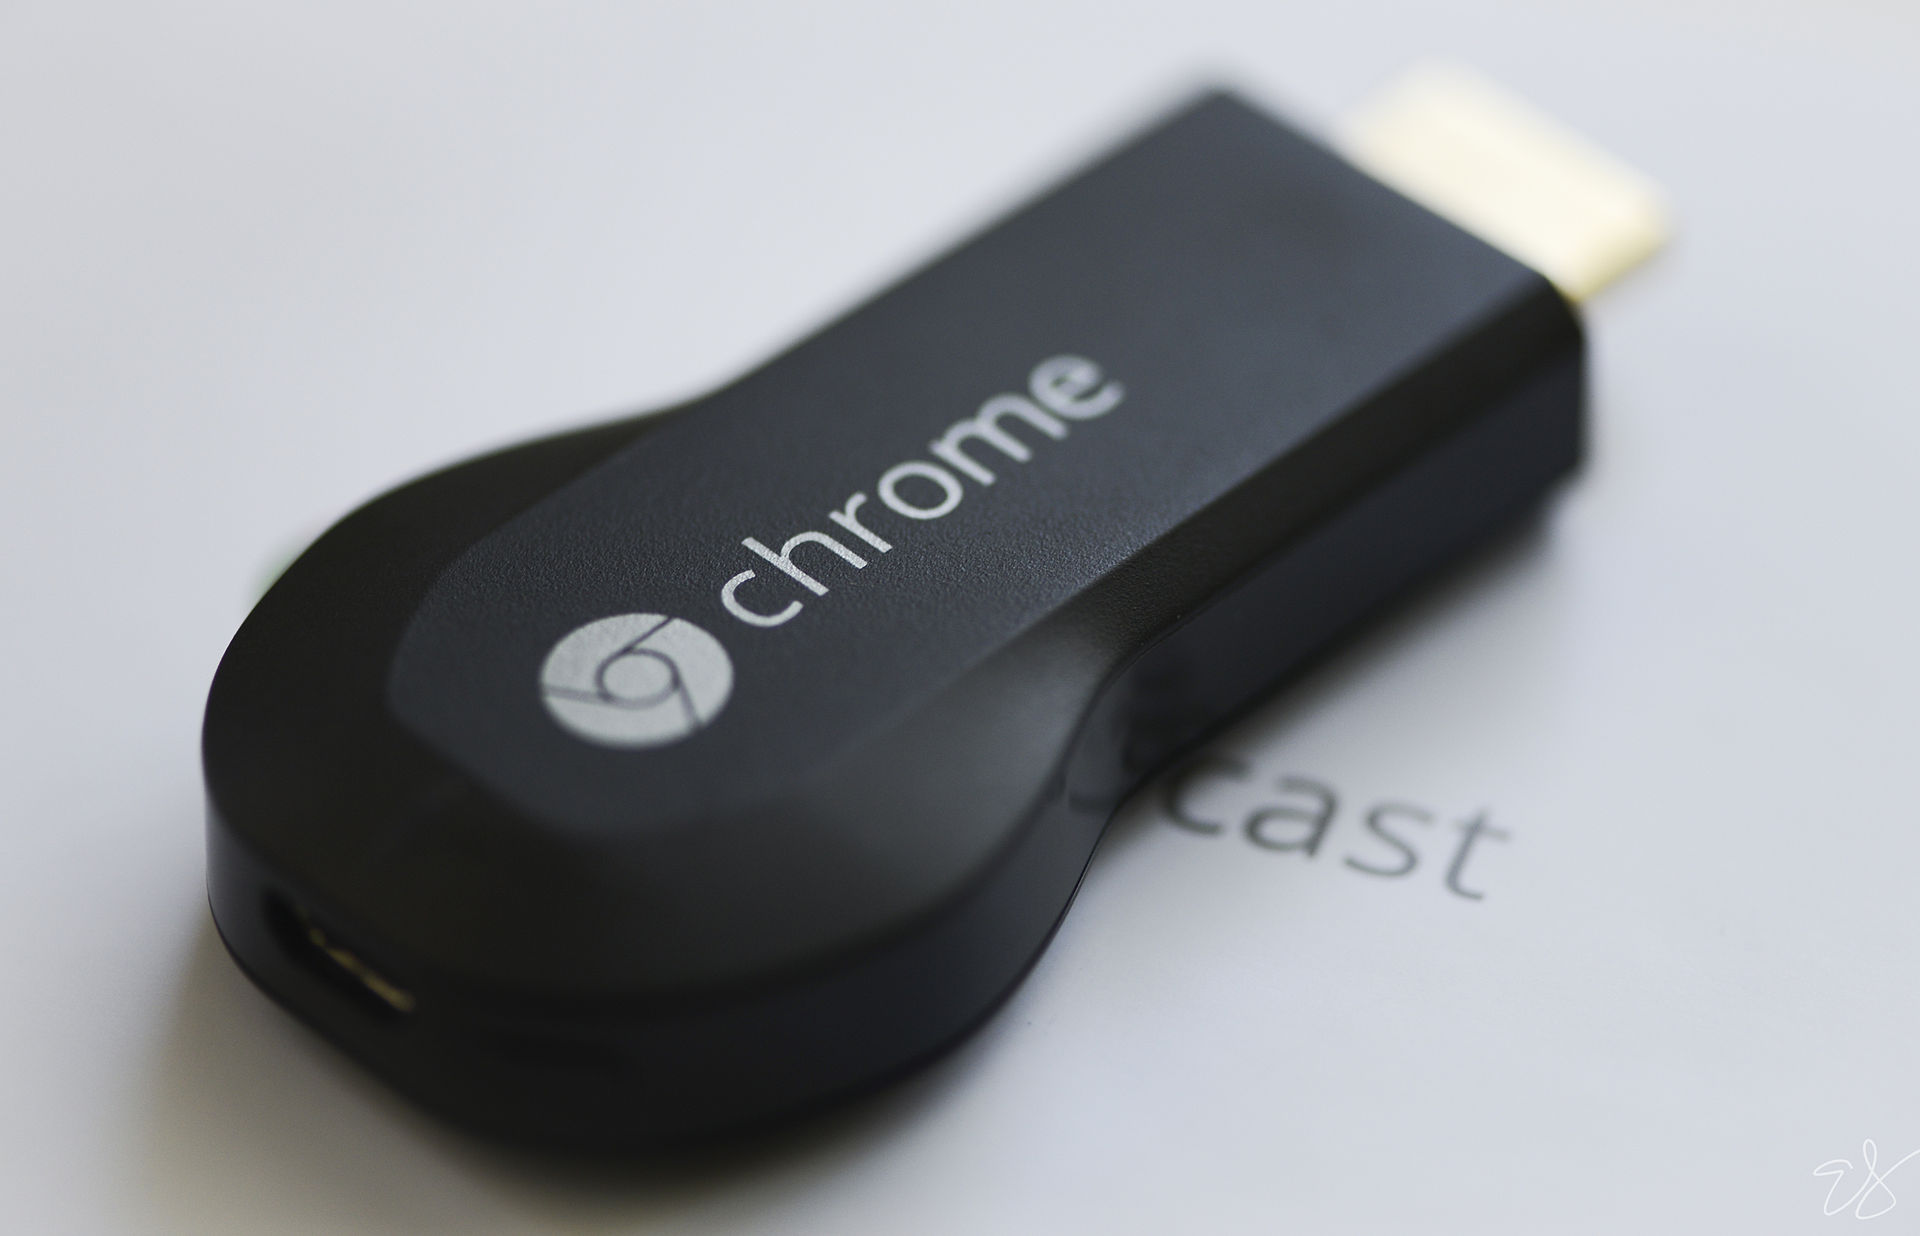 AirPlay Vs. Chromecast: A Comparison Of Wireless Streaming Options